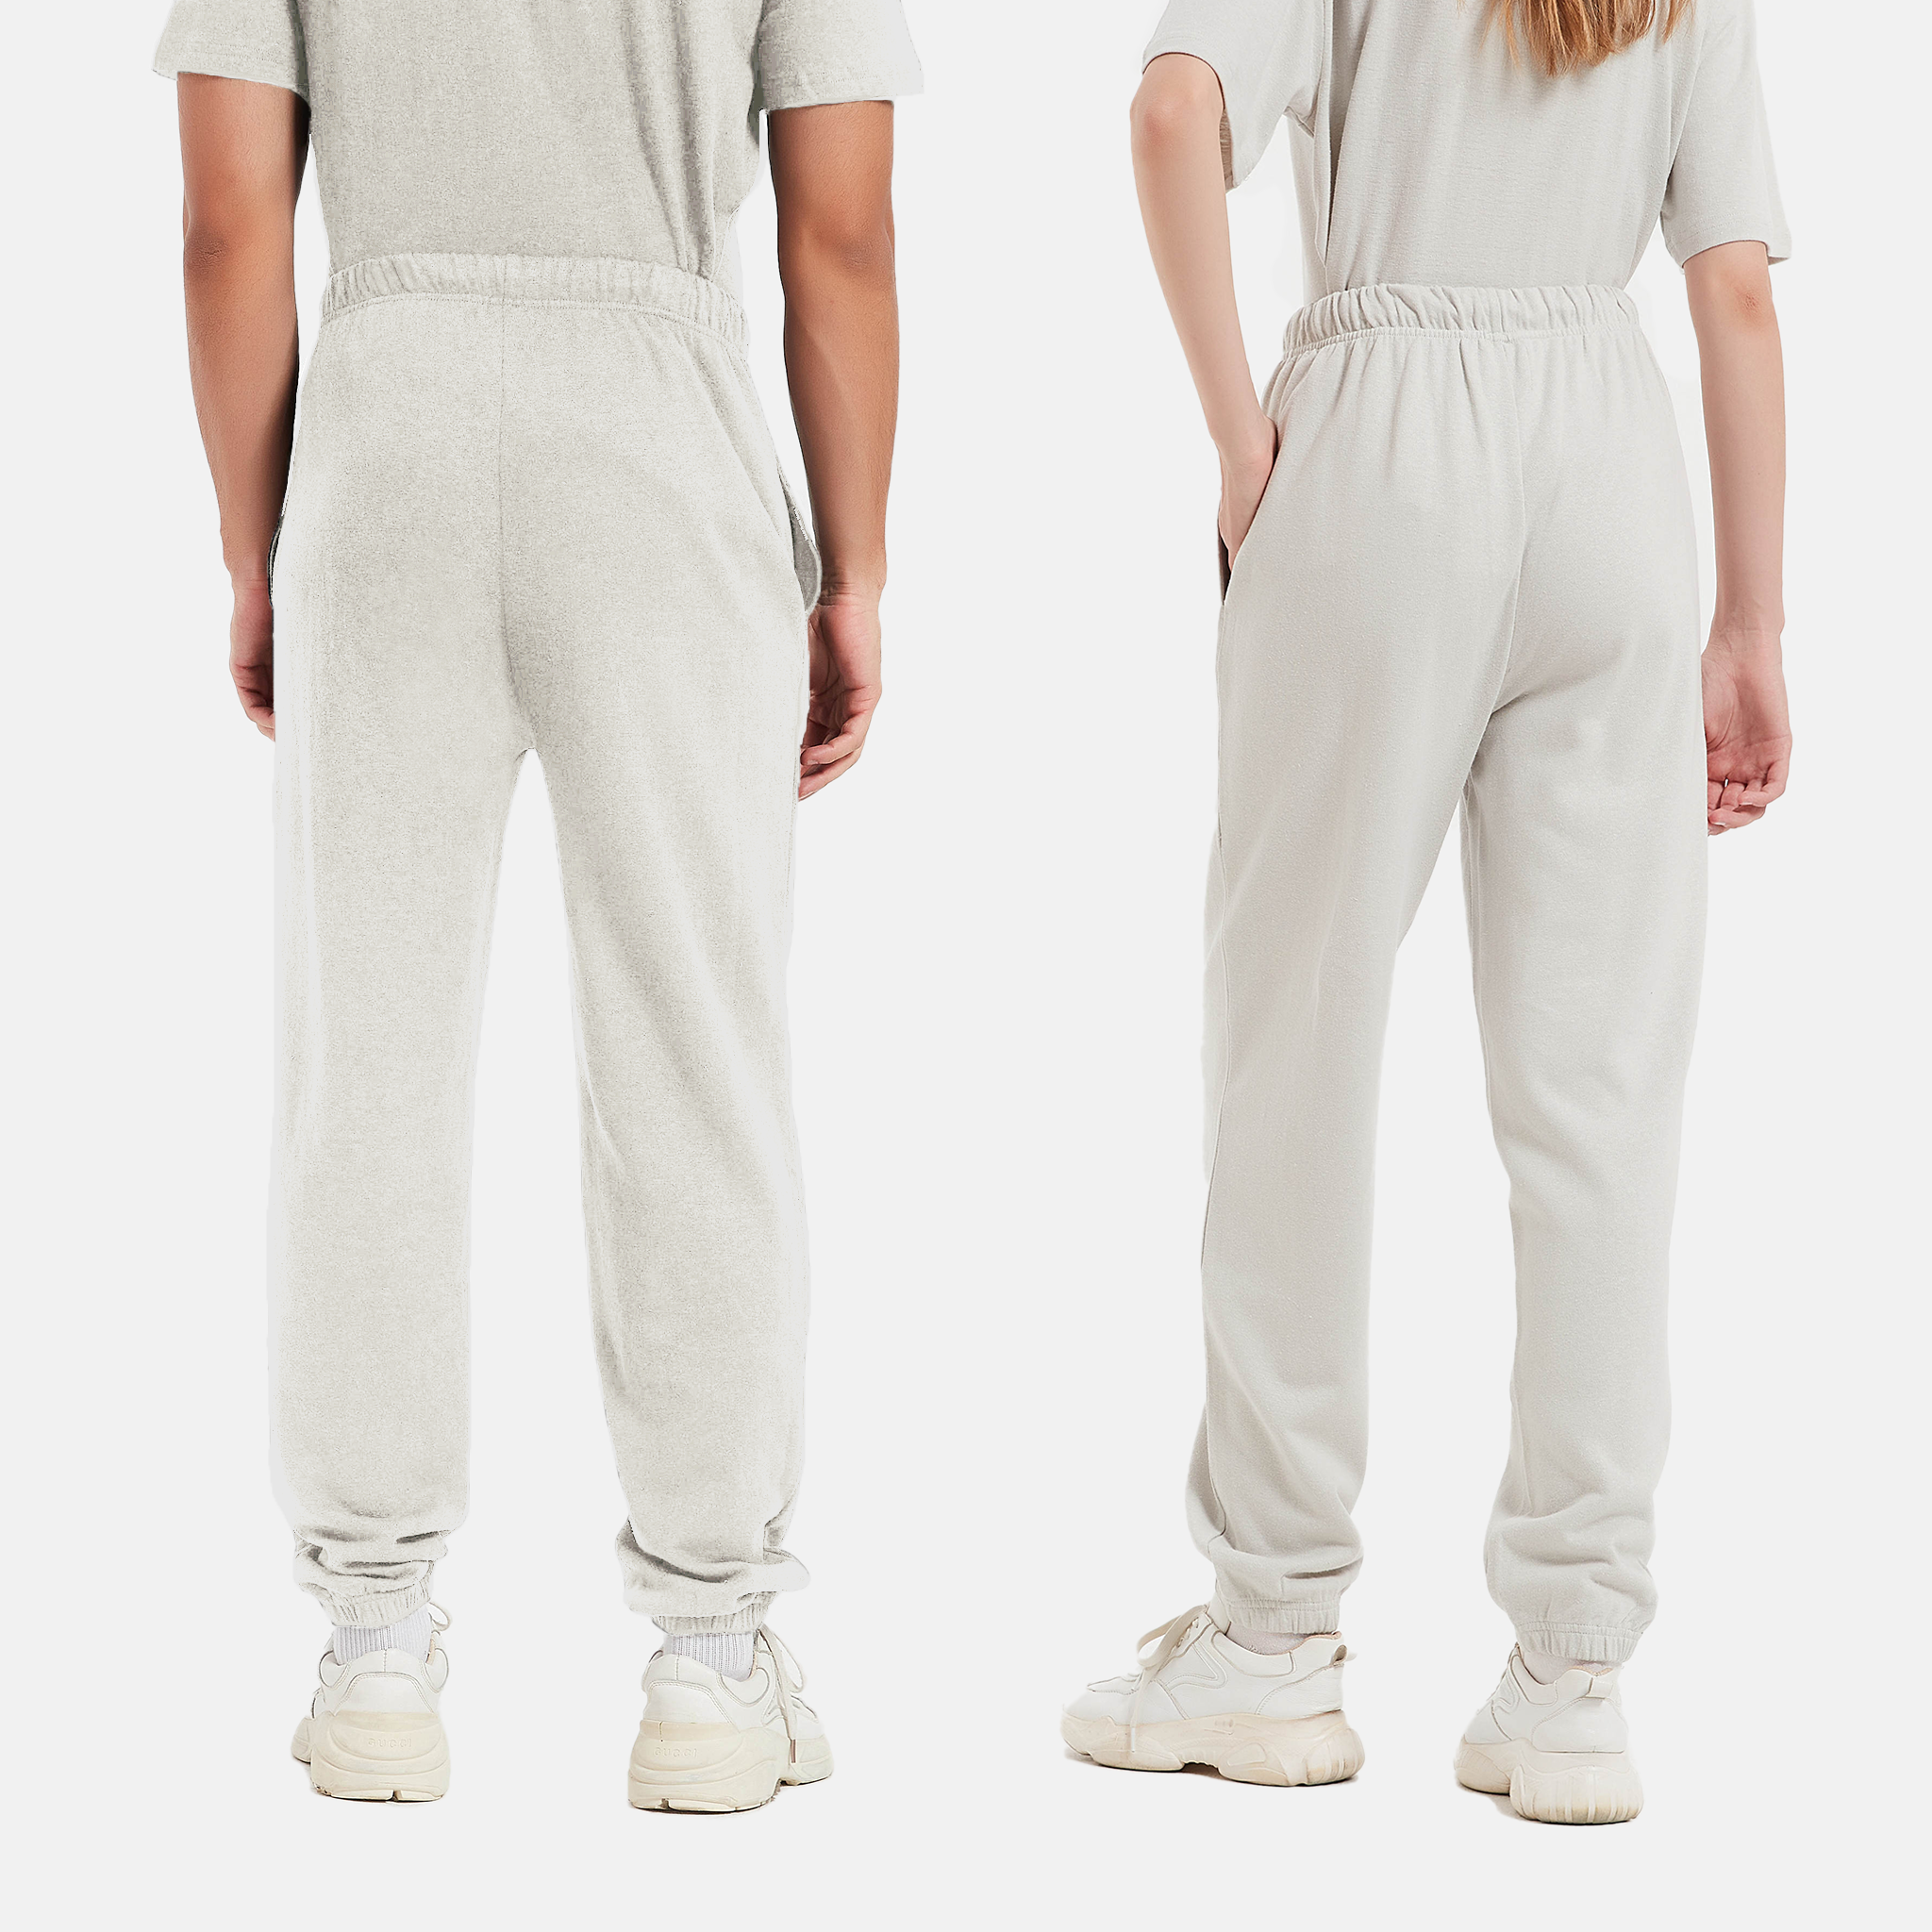 Sustainable Gray Joggers, Ethically Sourced Sweatpants for Eco-Friendly Fashion, Unisex